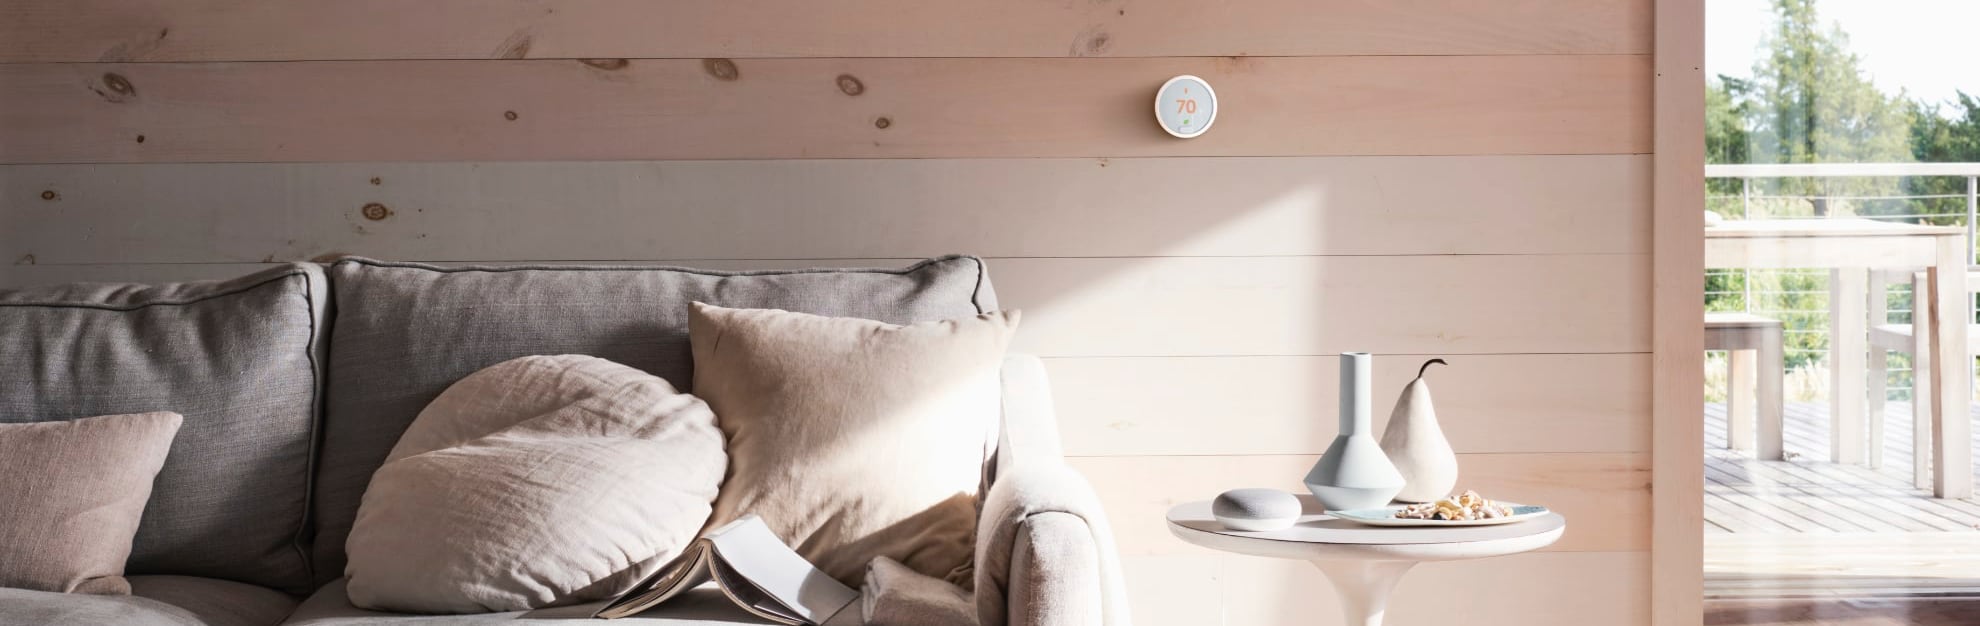 Vivint Home Automation in Las Cruces